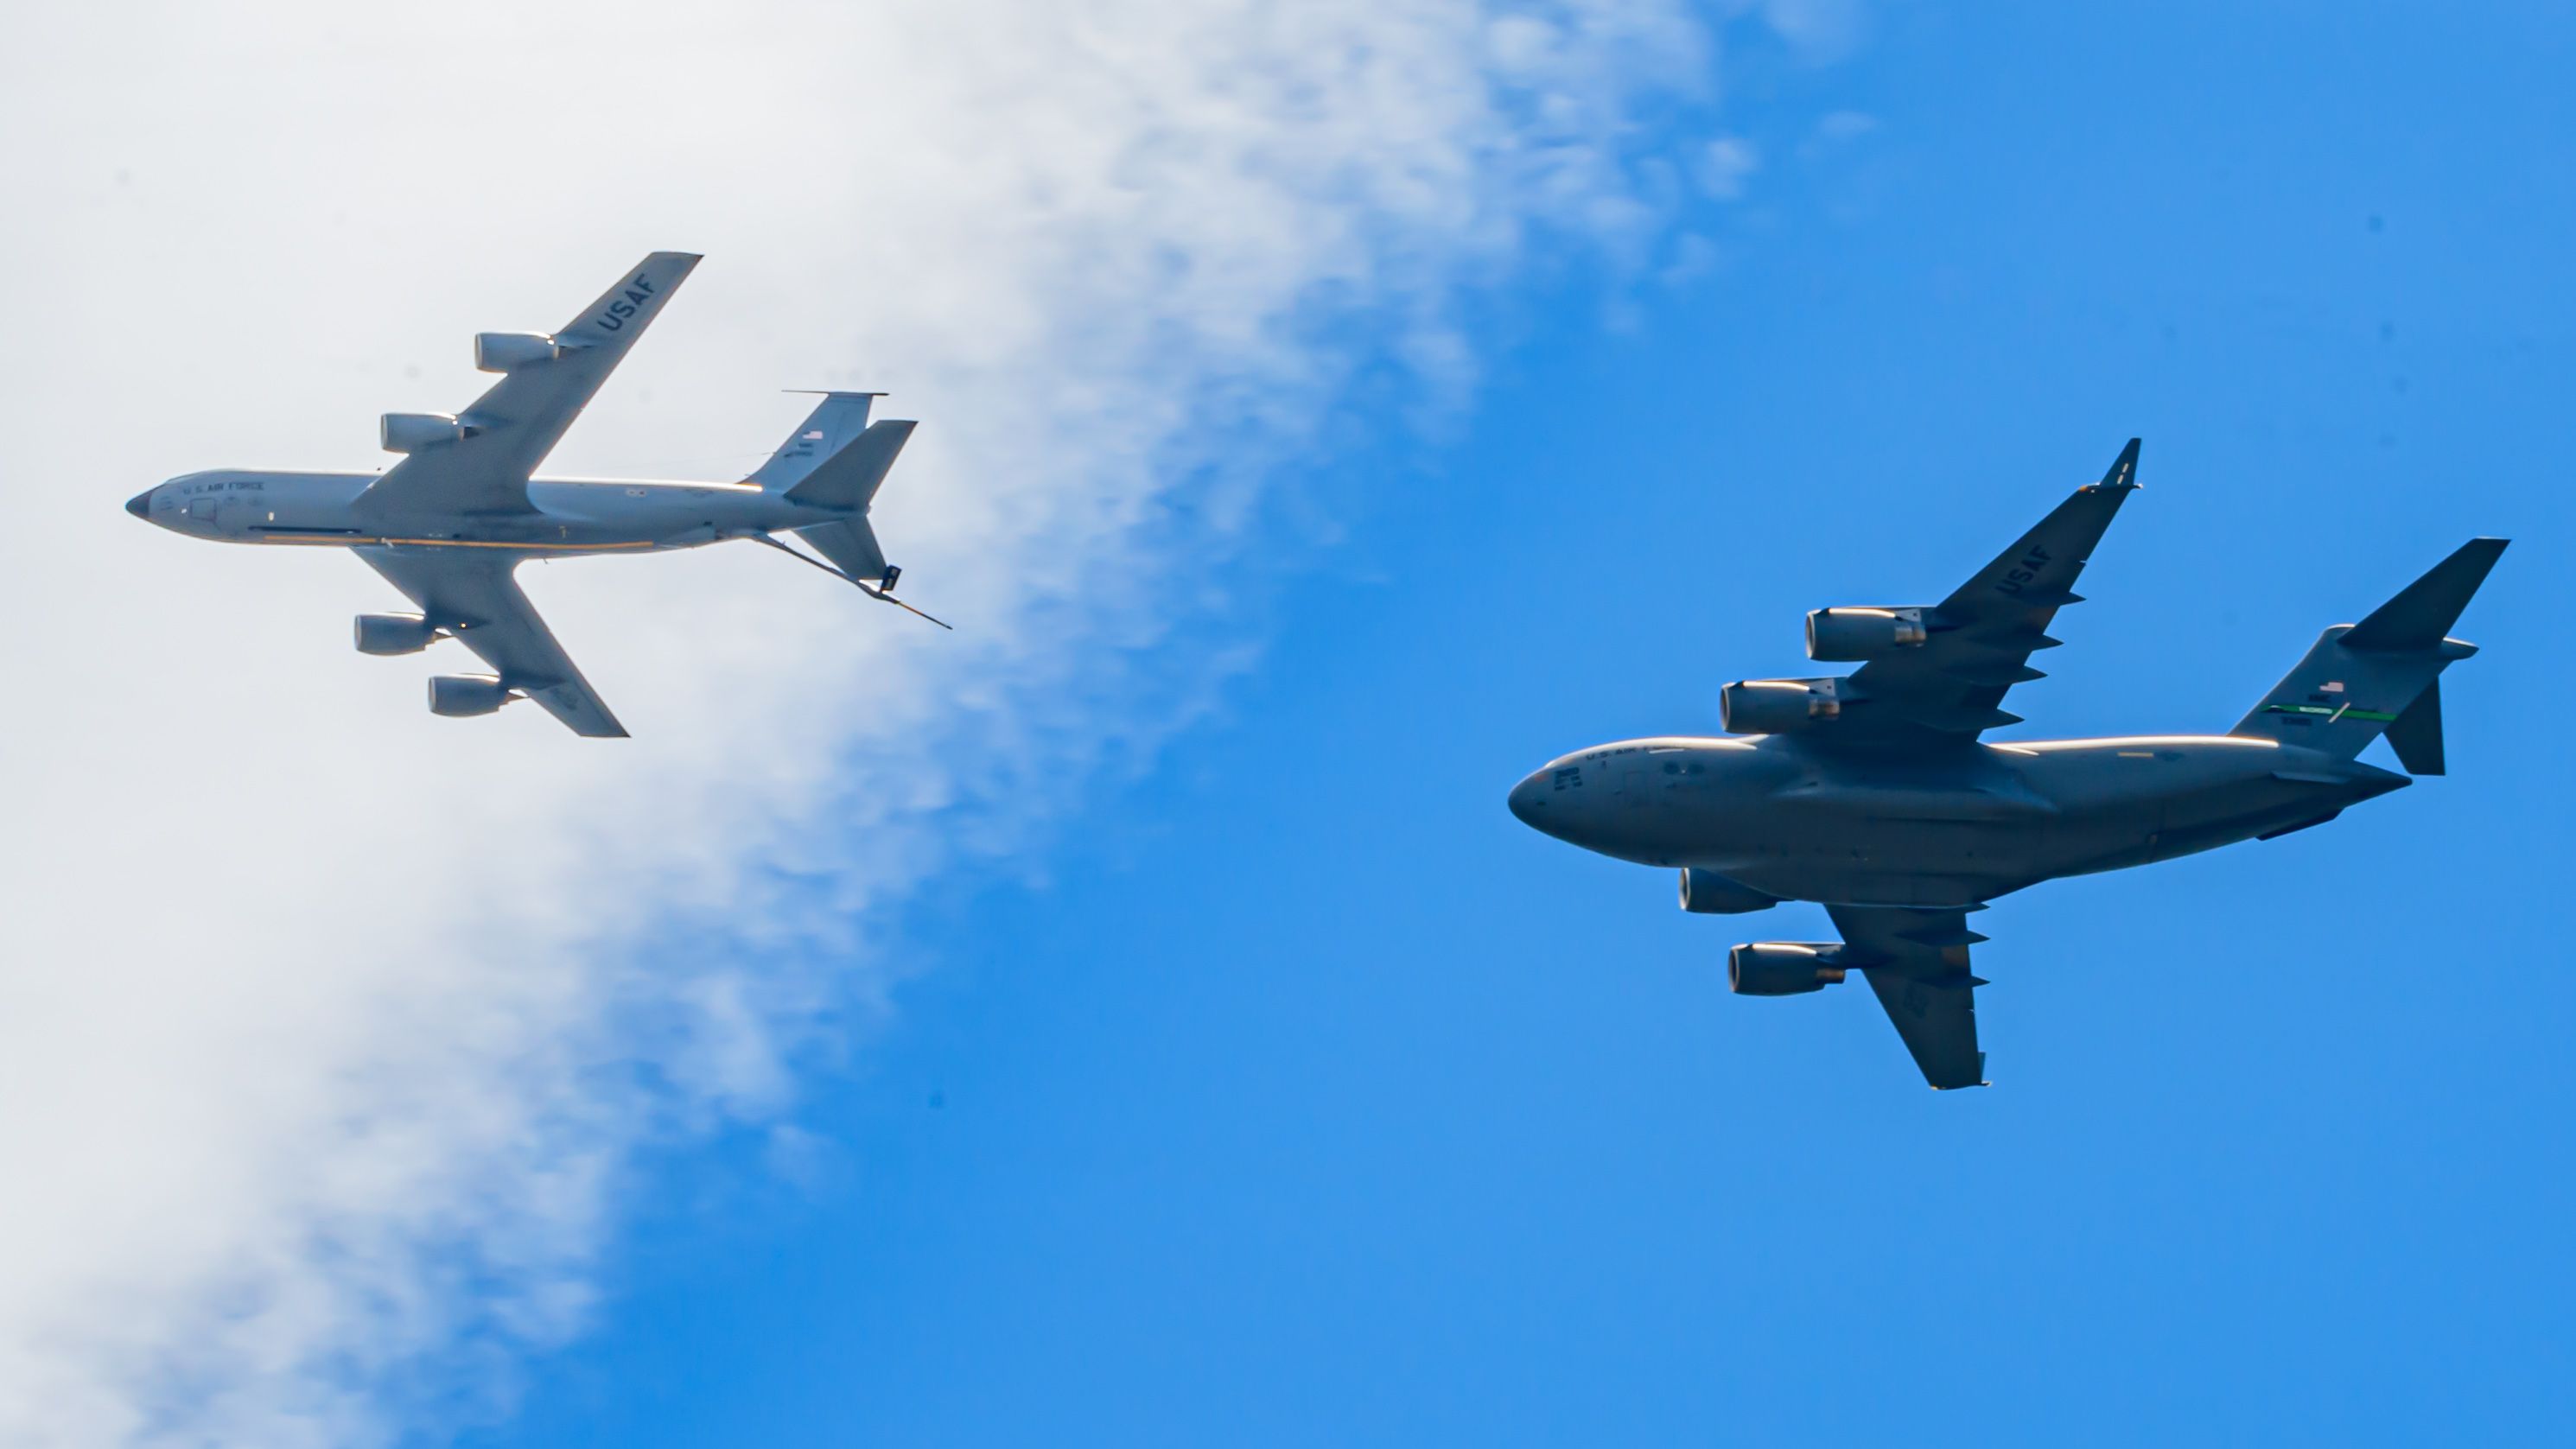 Looking Up at C-17 in Pre-Contact With KC-135 Under Cirrus Cloud - 16x9